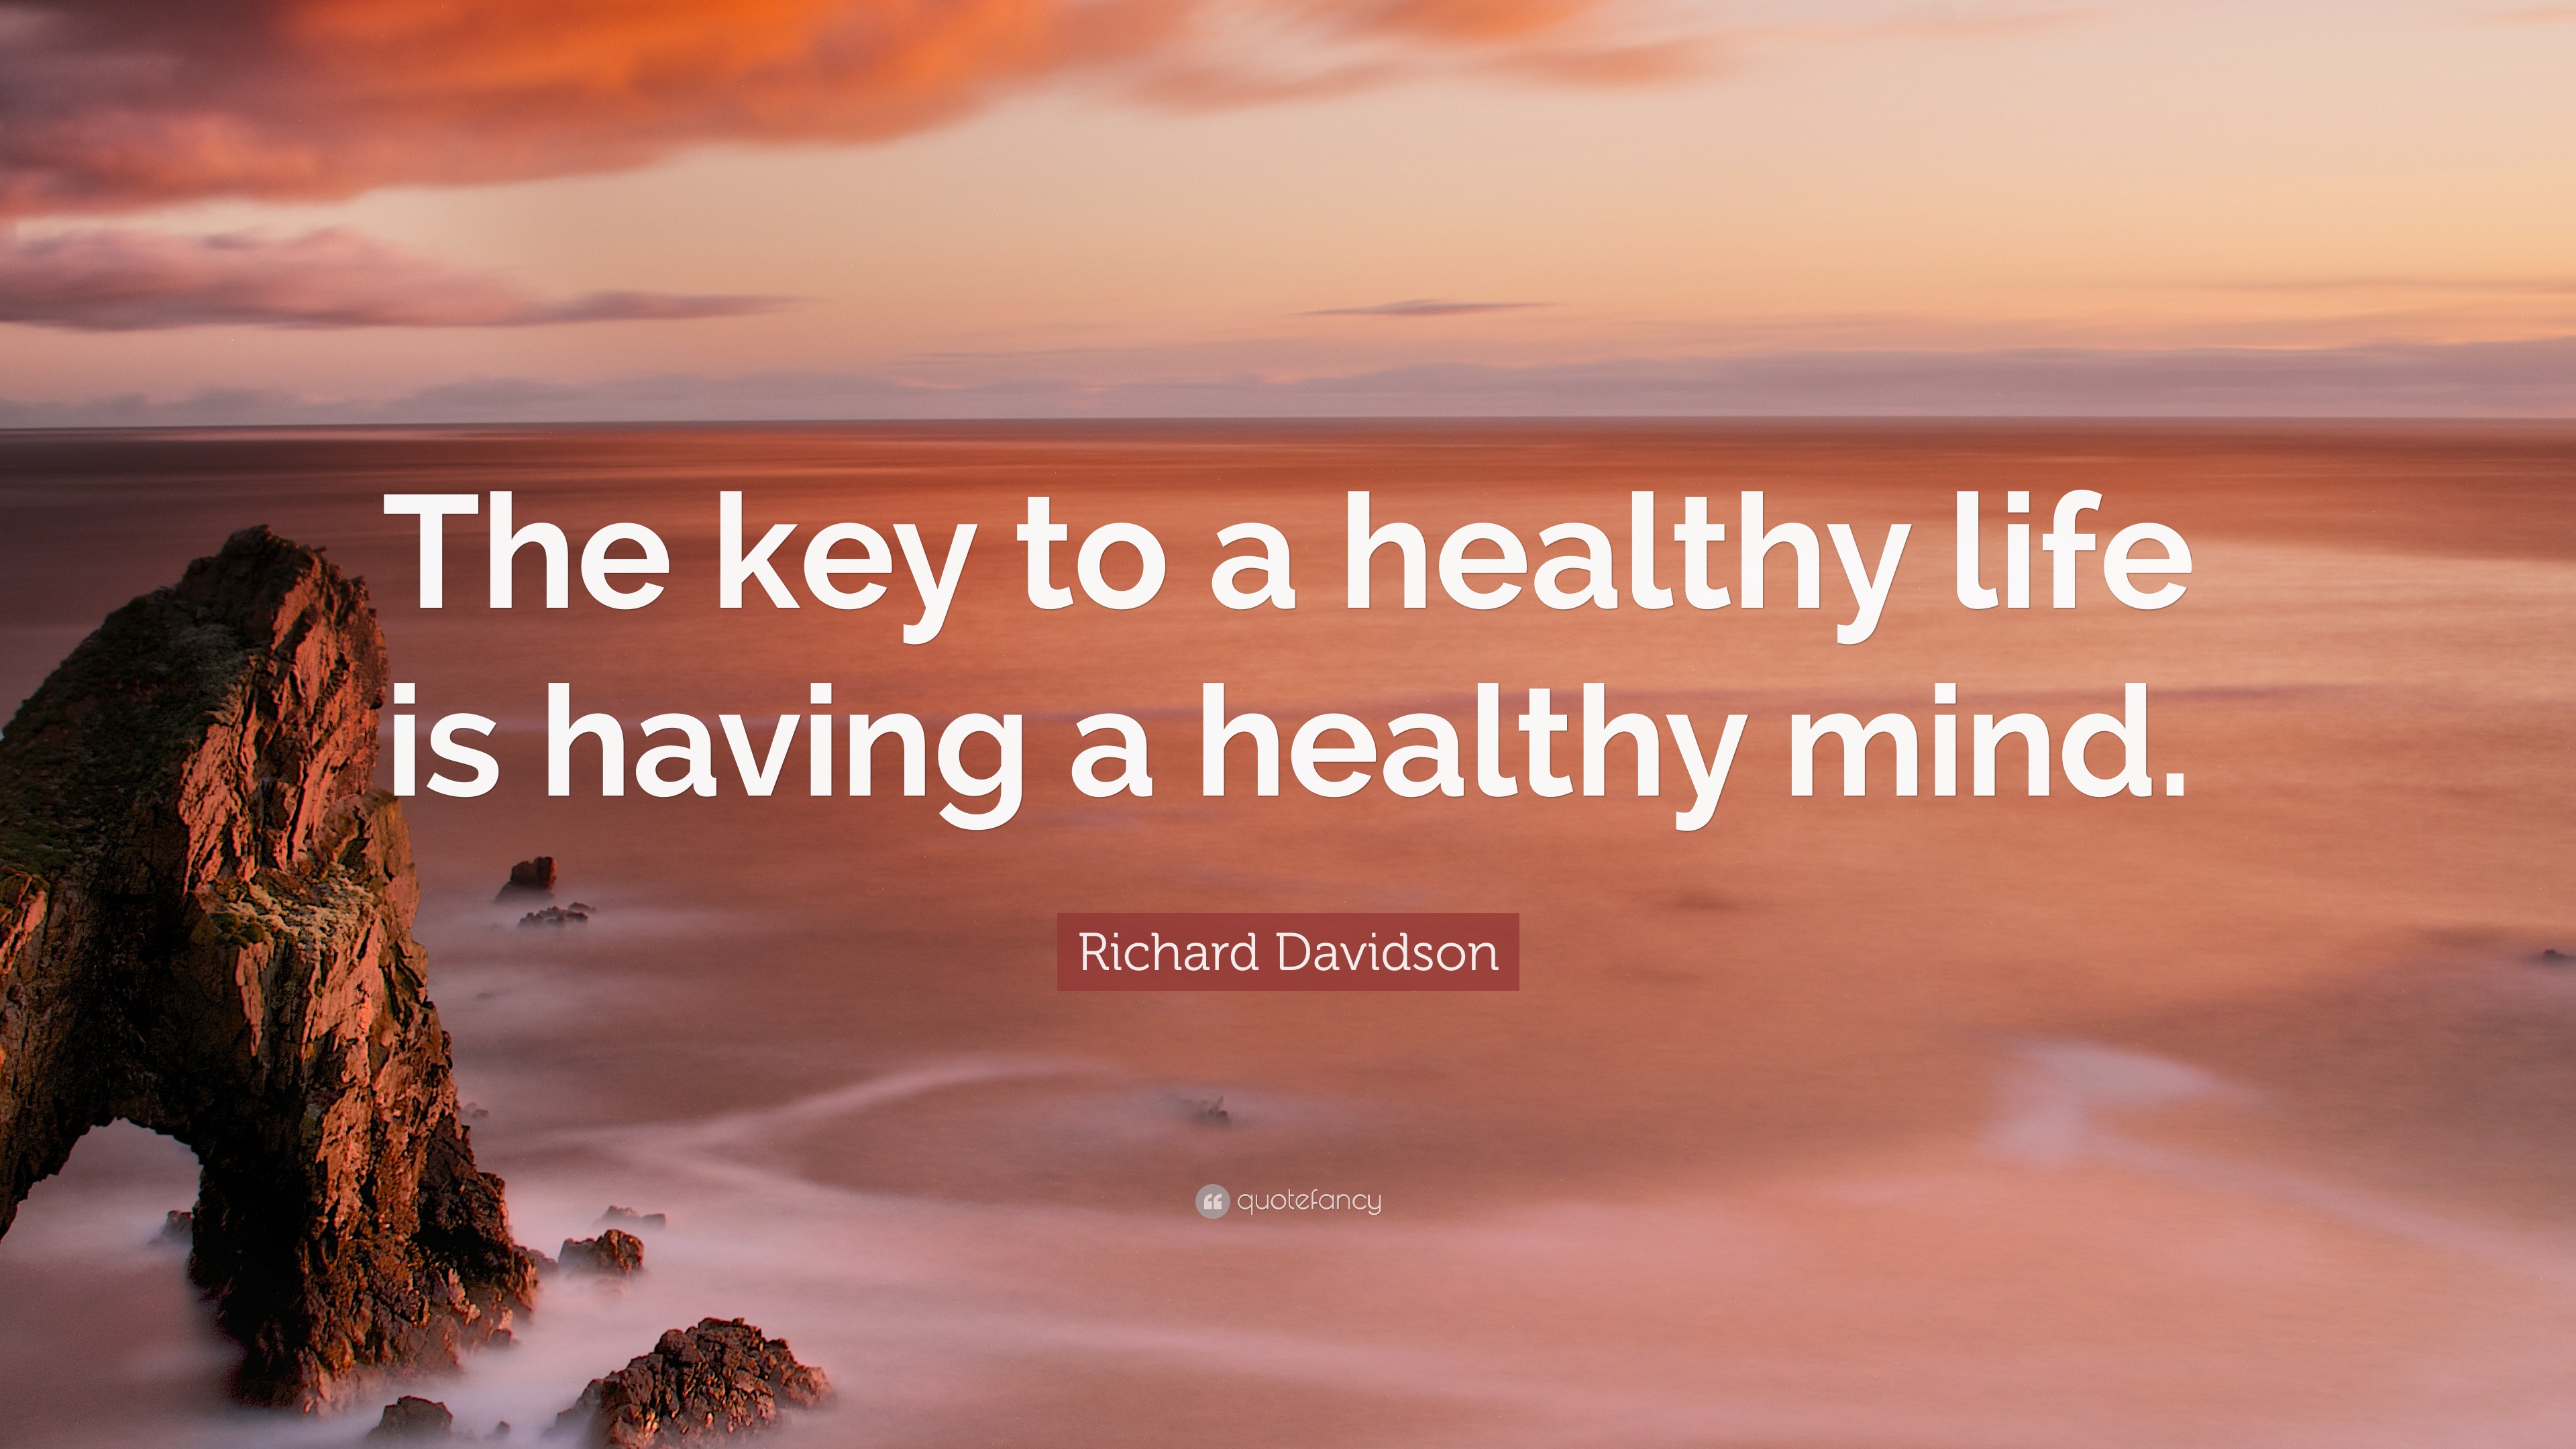 Richard Davidson Quote: “The key to a healthy life is having a healthy